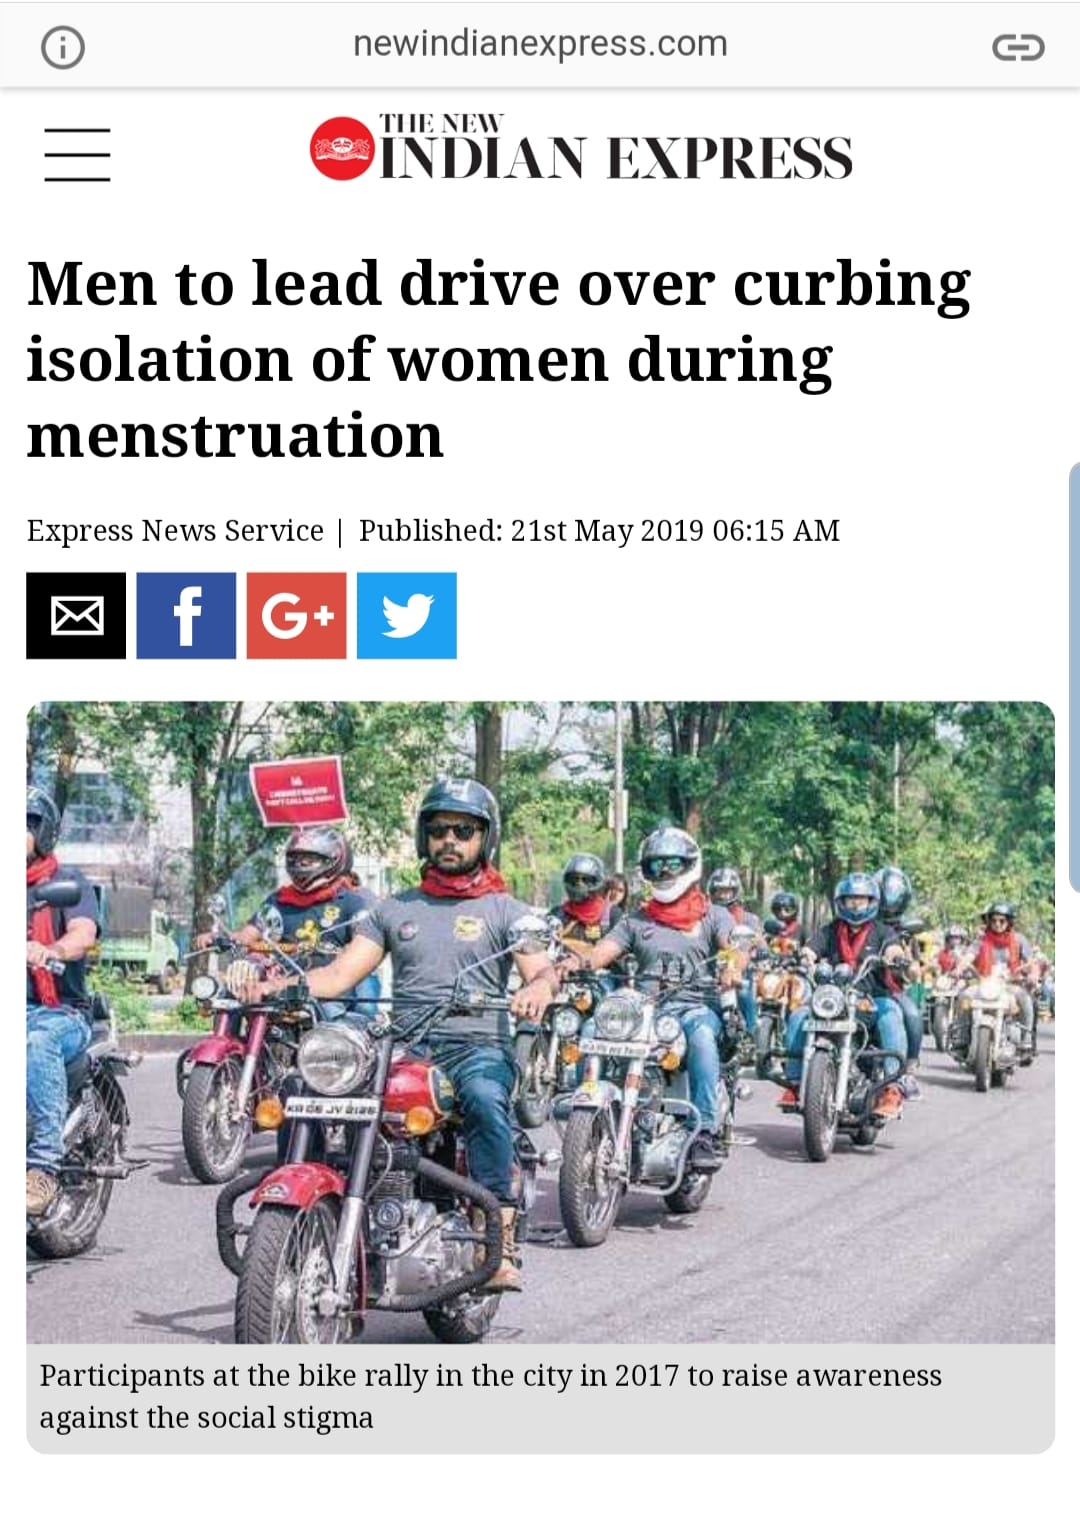 Men Take Lead Ride 2019 was on the New Indian Express( a leading national newspaper)